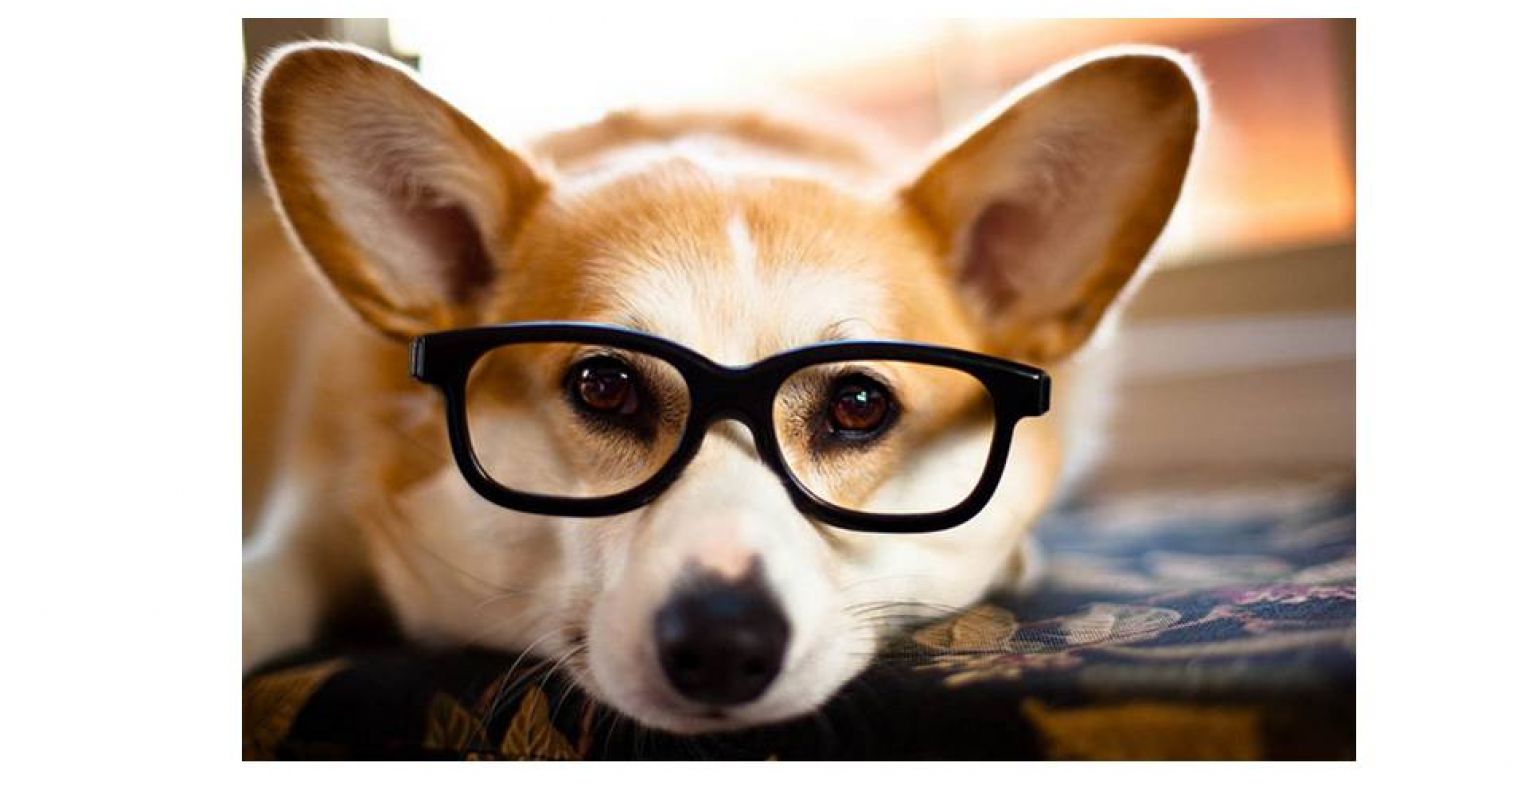 Compared to Humans, How Good Is a Dog's Visual Acuity? | Psychology Today